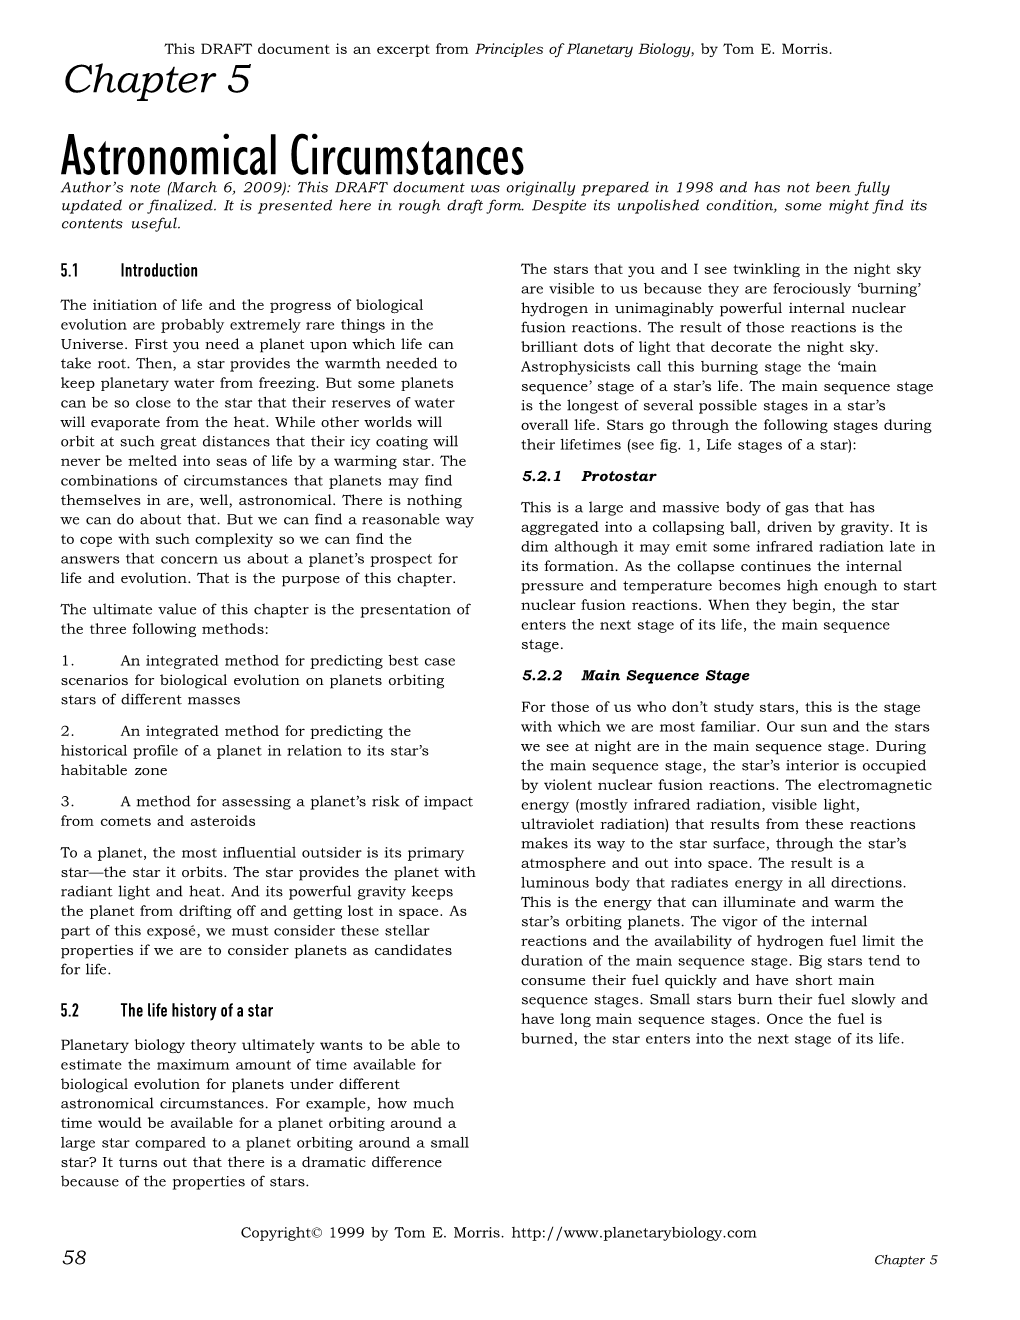 Chapter 5 Astronomical Circumstances Author’S Note (March 6, 2009): This DRAFT Document Was Originally Prepared in 1998 and Has Not Been Fully Updated Or Finalized